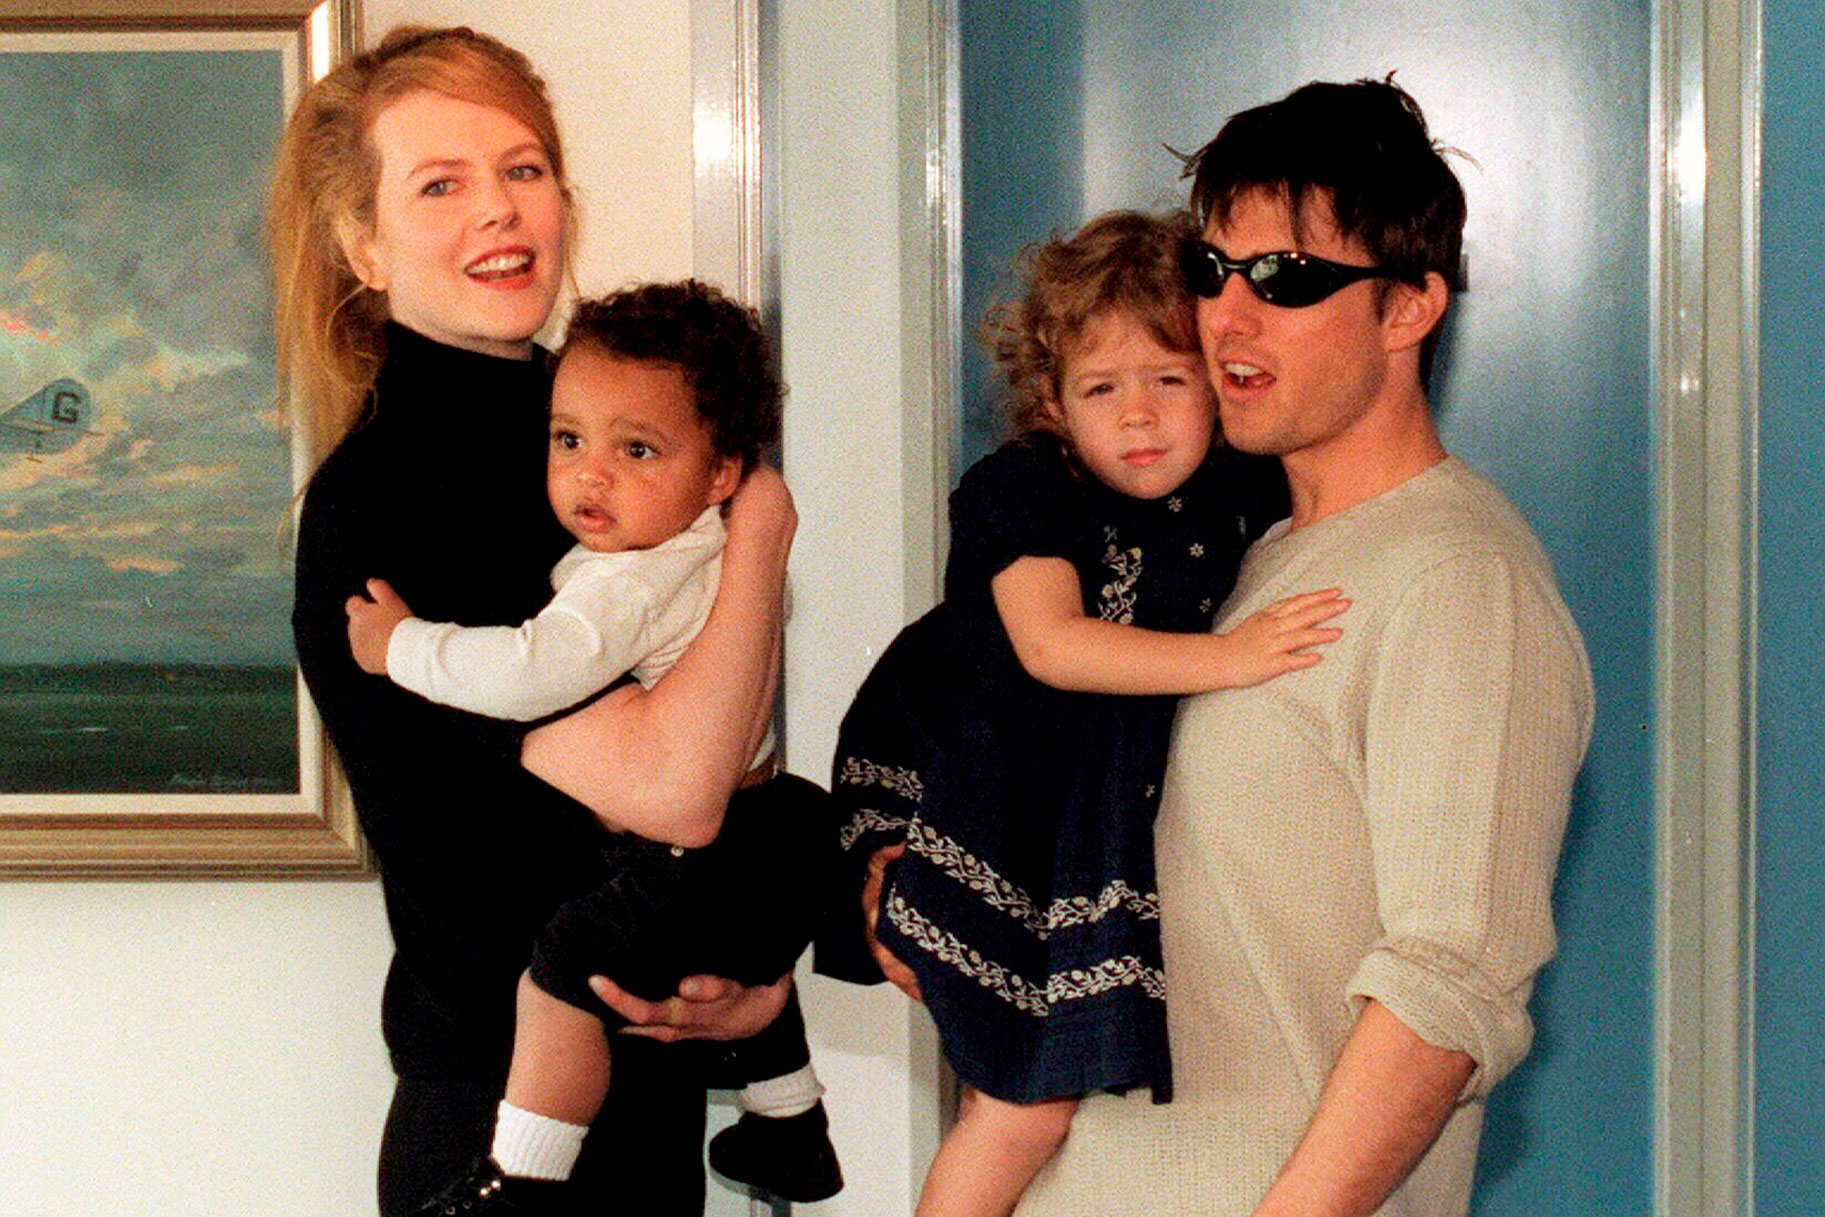 Tom Cruise and Nicole Kidman holding their adopted children